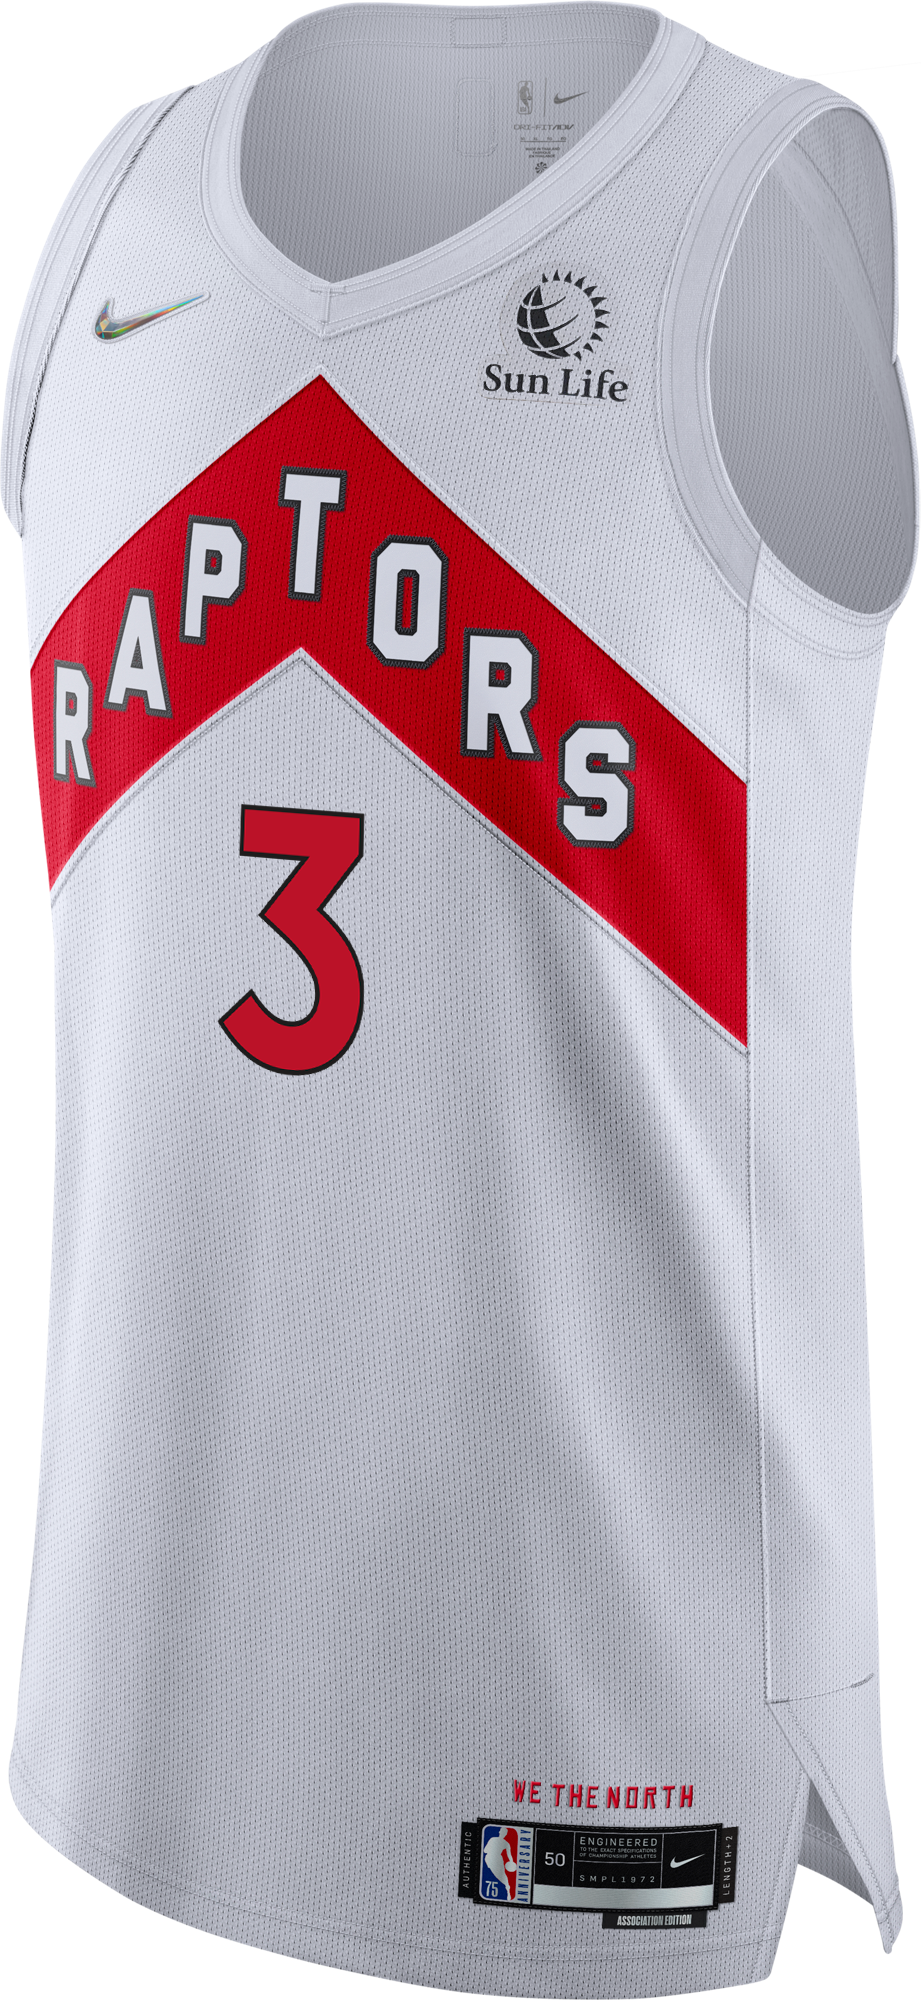 Nike drops new jersey designs for Raptors and every other NBA team